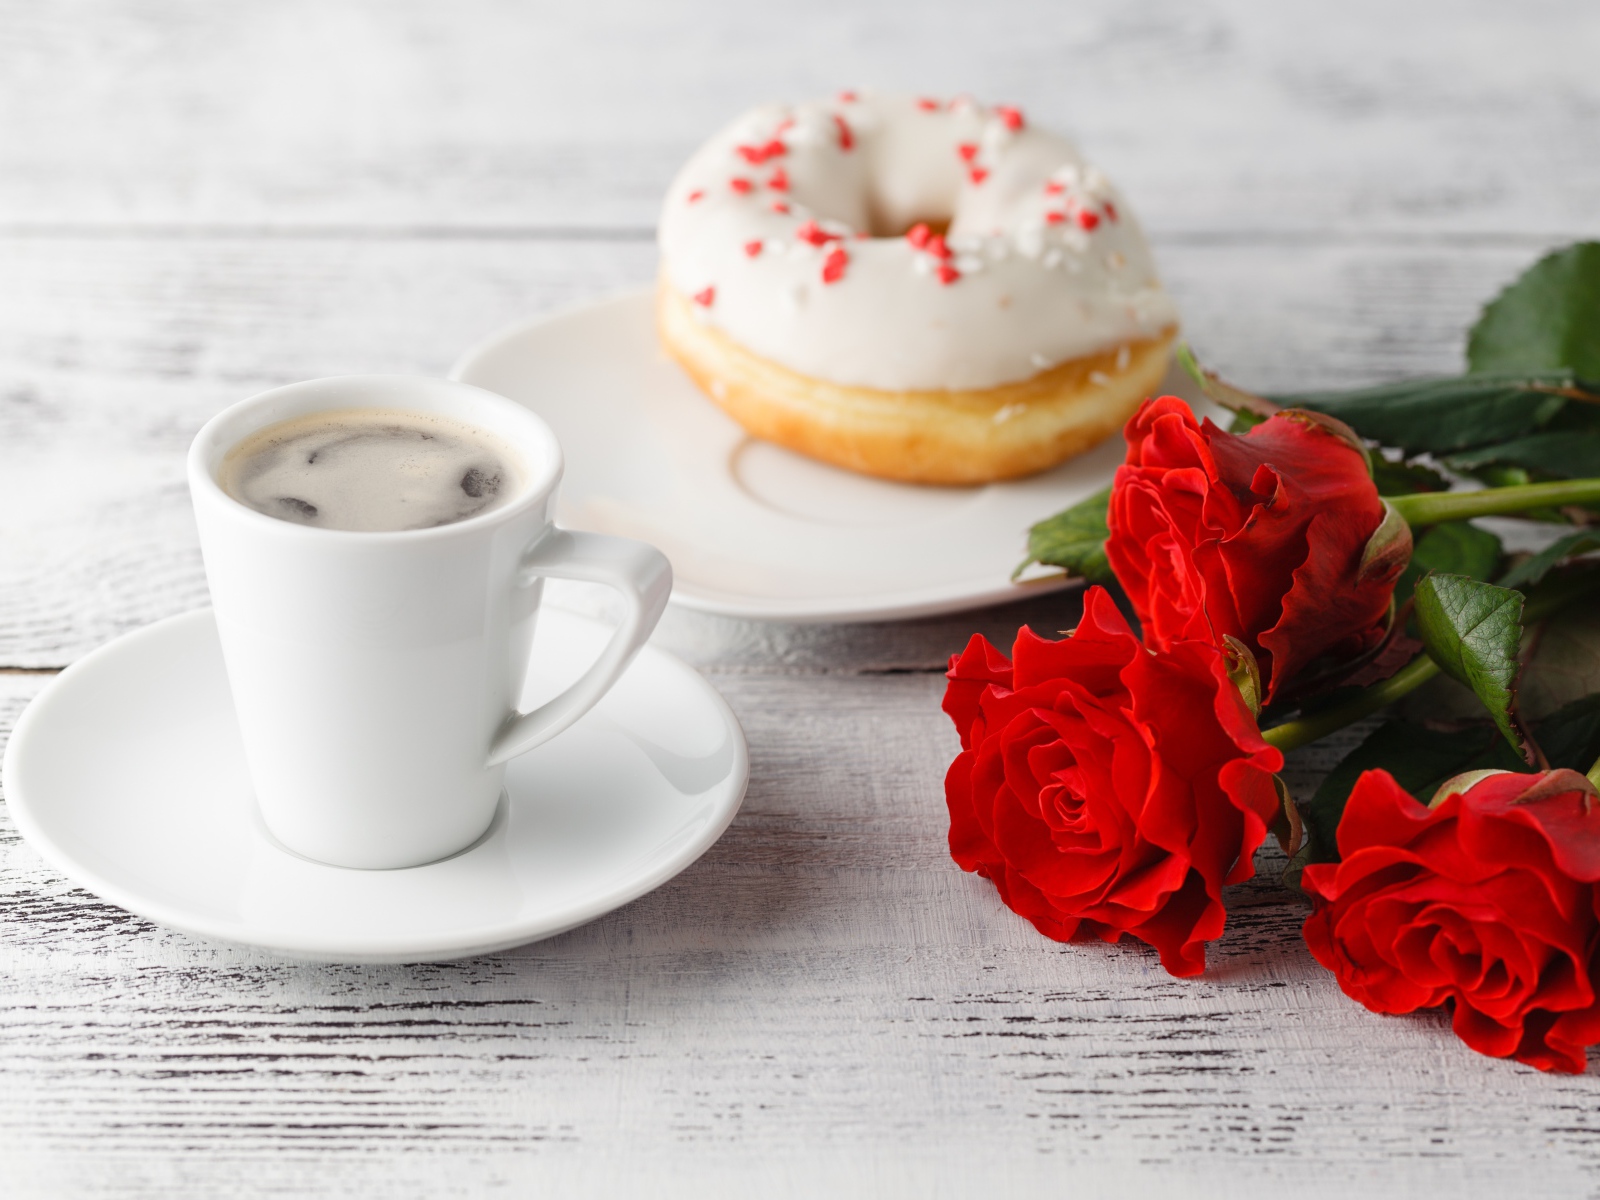 Cup of coffee, a donut and three red roses on the table